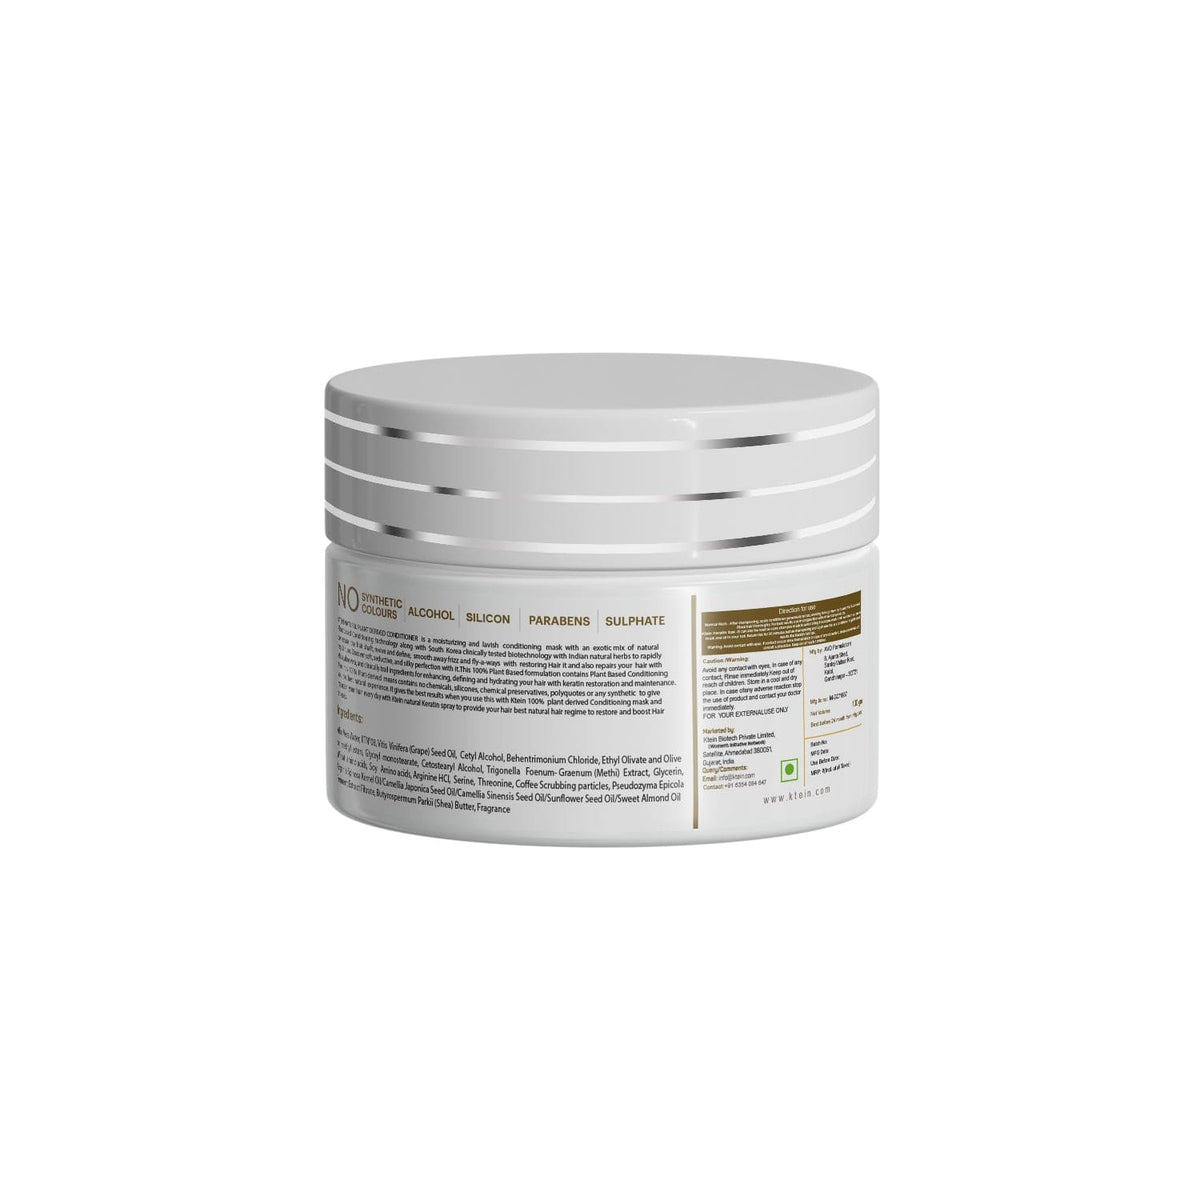 Chemical Free Plant Derived Conditioning Hair Mask - 100g - Ktein Cosmetics By Ktein Biotech Private Limited